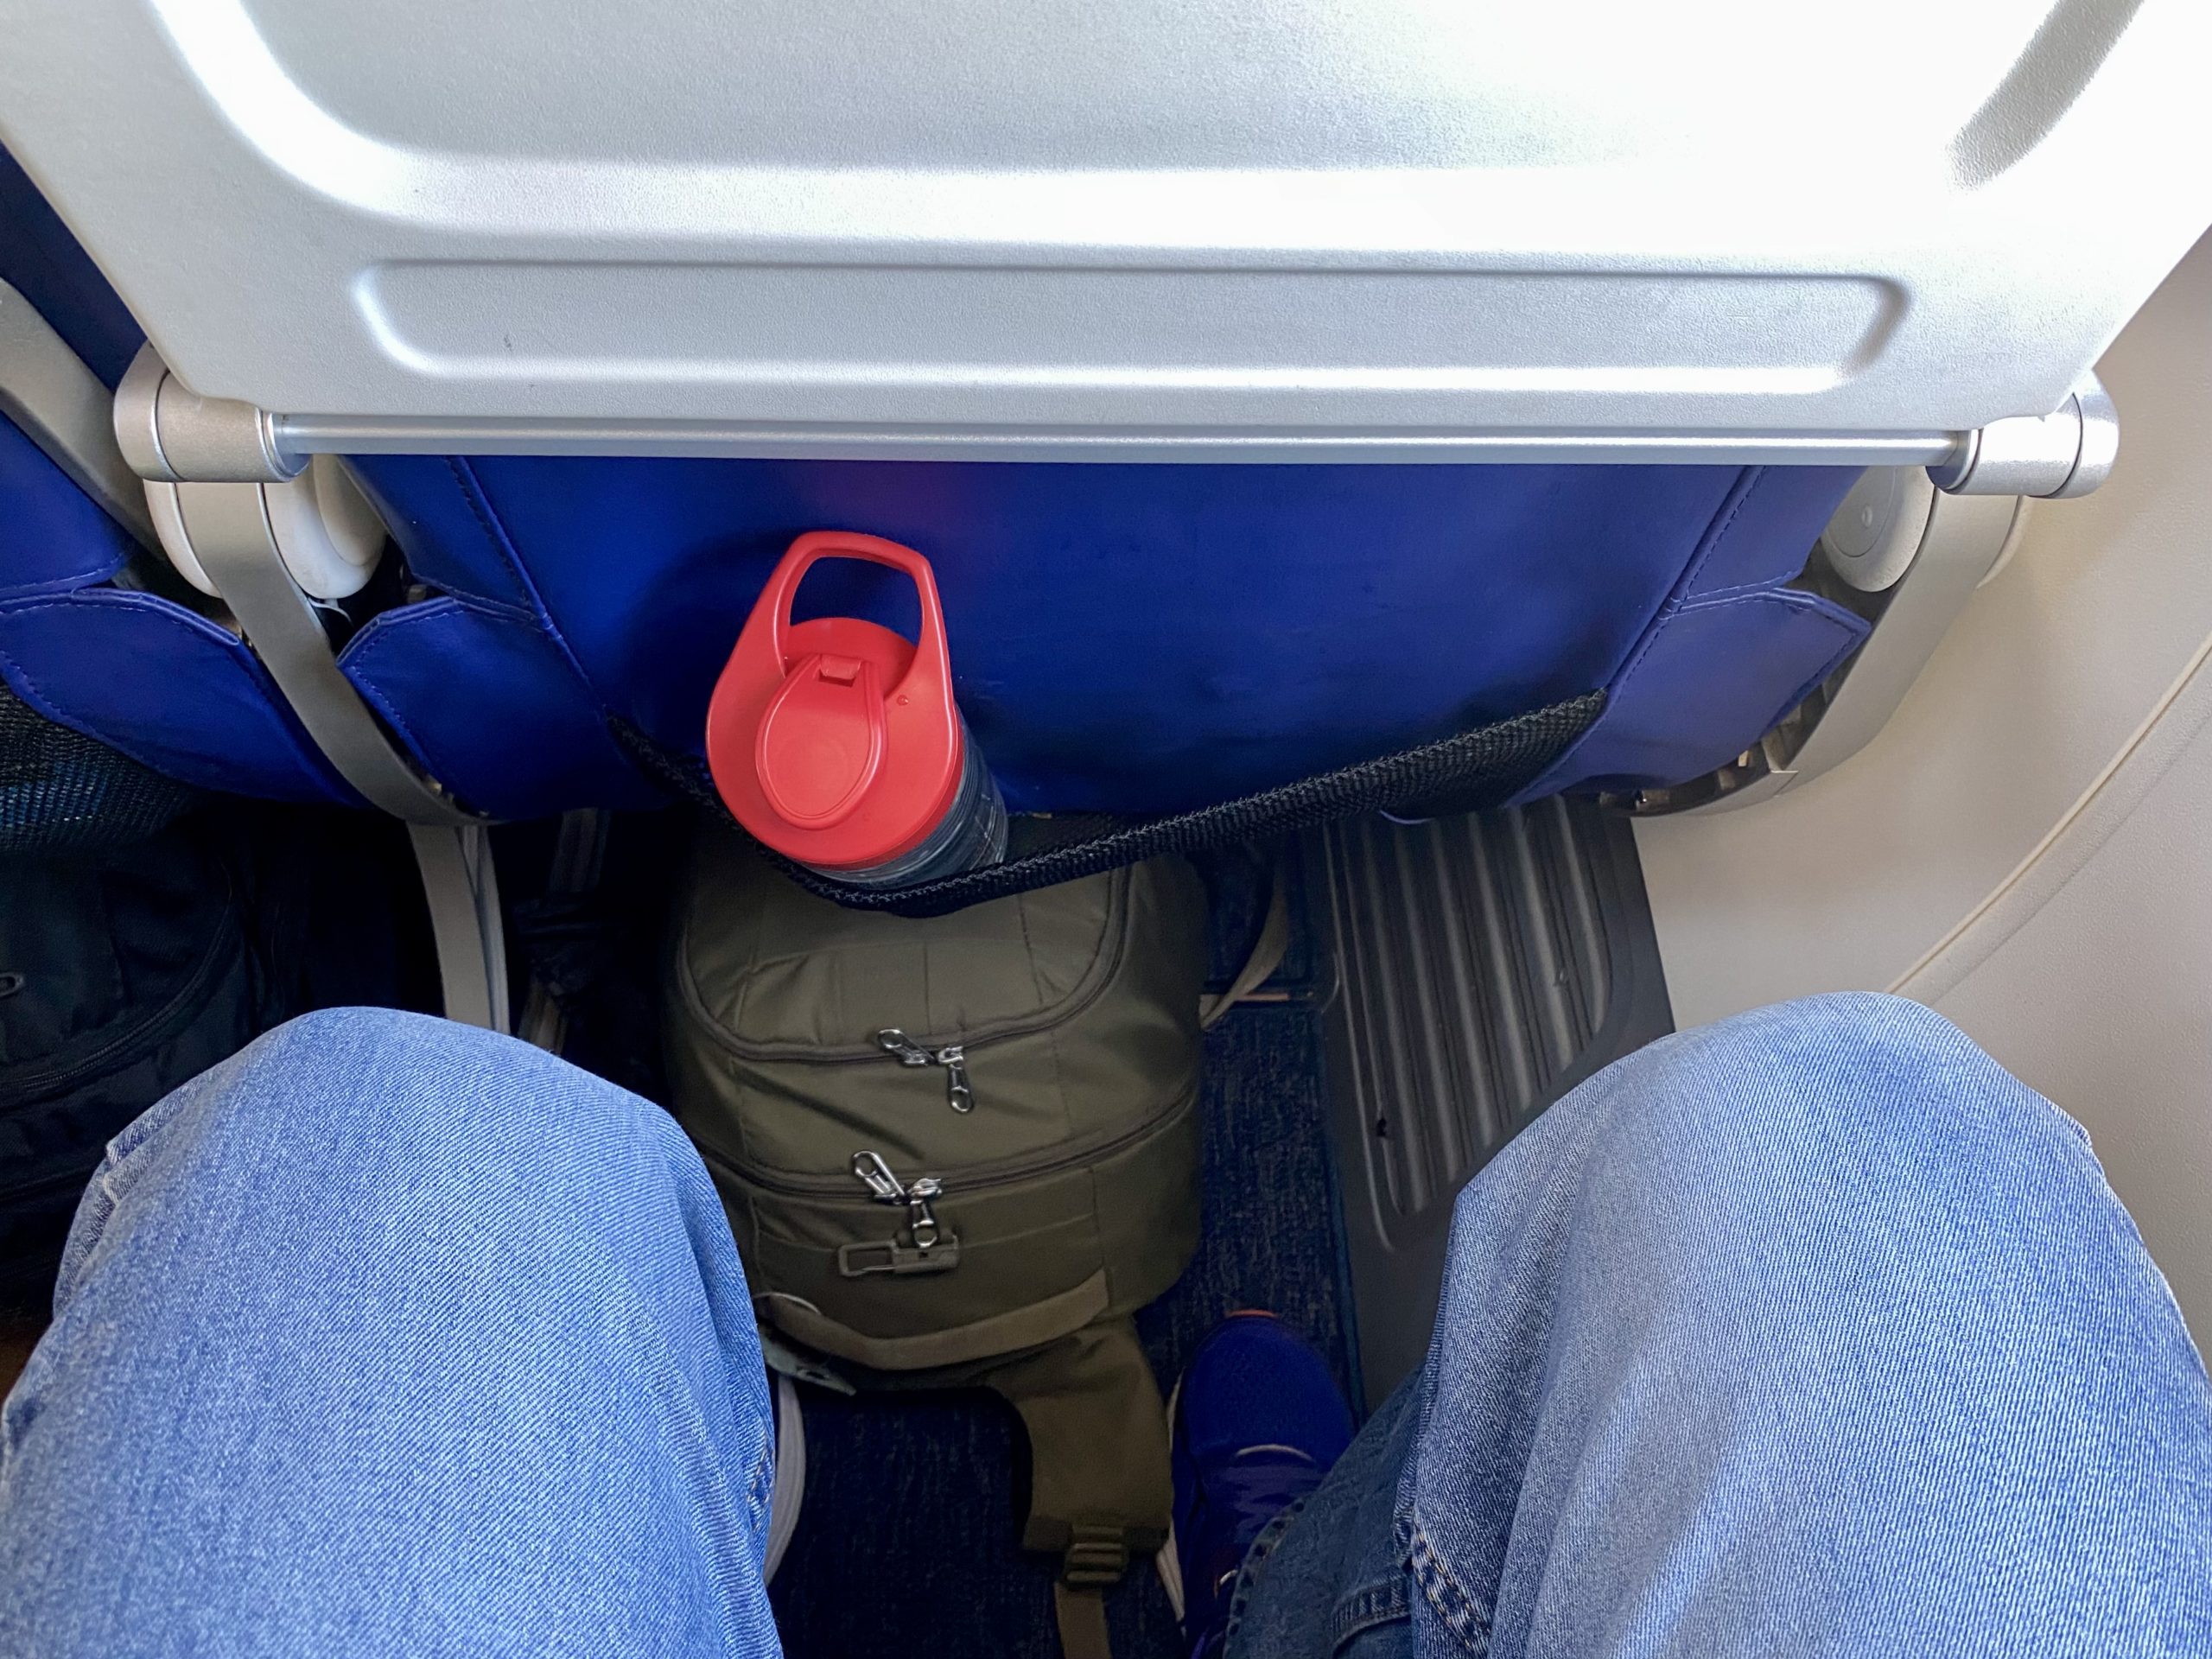 a person's legs and a backpack on a plane